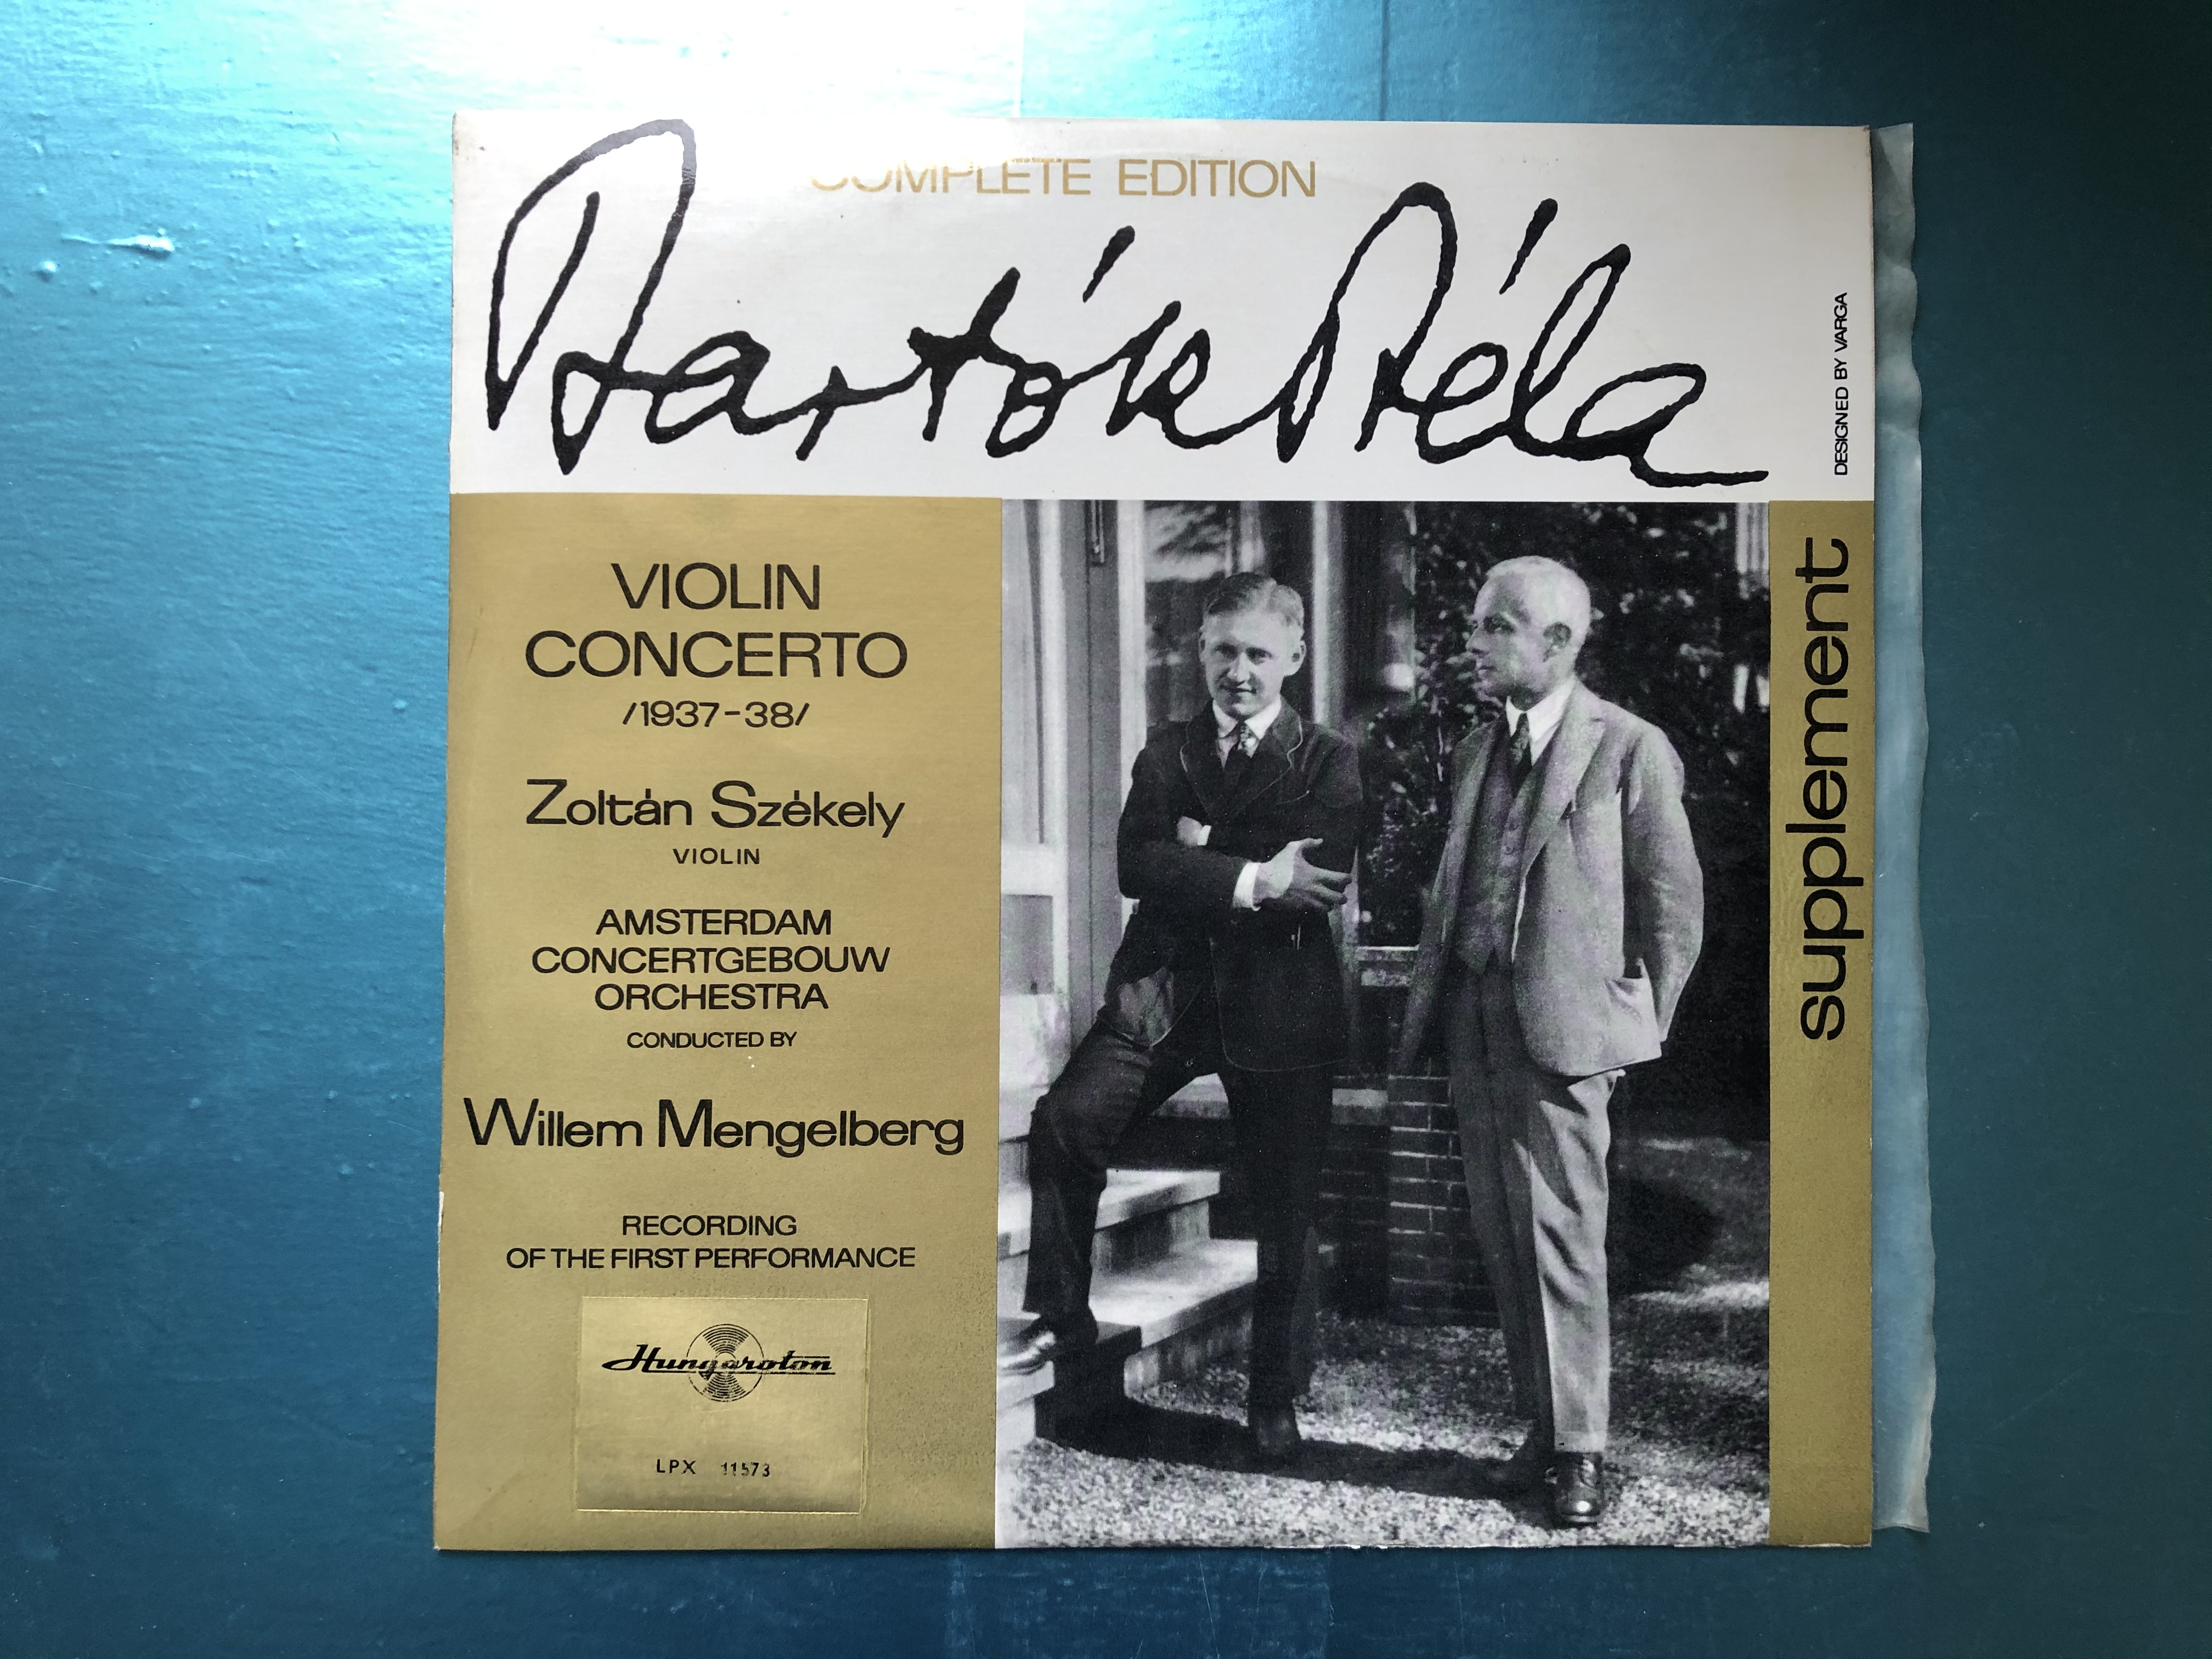 Bartók Béla - Violin Concerto (1937-38) / Zoltan Szekely - violin,  Amsterdam Concertgebouw Orchestra, Conducted by Willem Mengelberg /  Recording Of The First Performance / Bartók Béla Complete Edition –  Supplement / Hungaroton LP / LPX 1157 ...